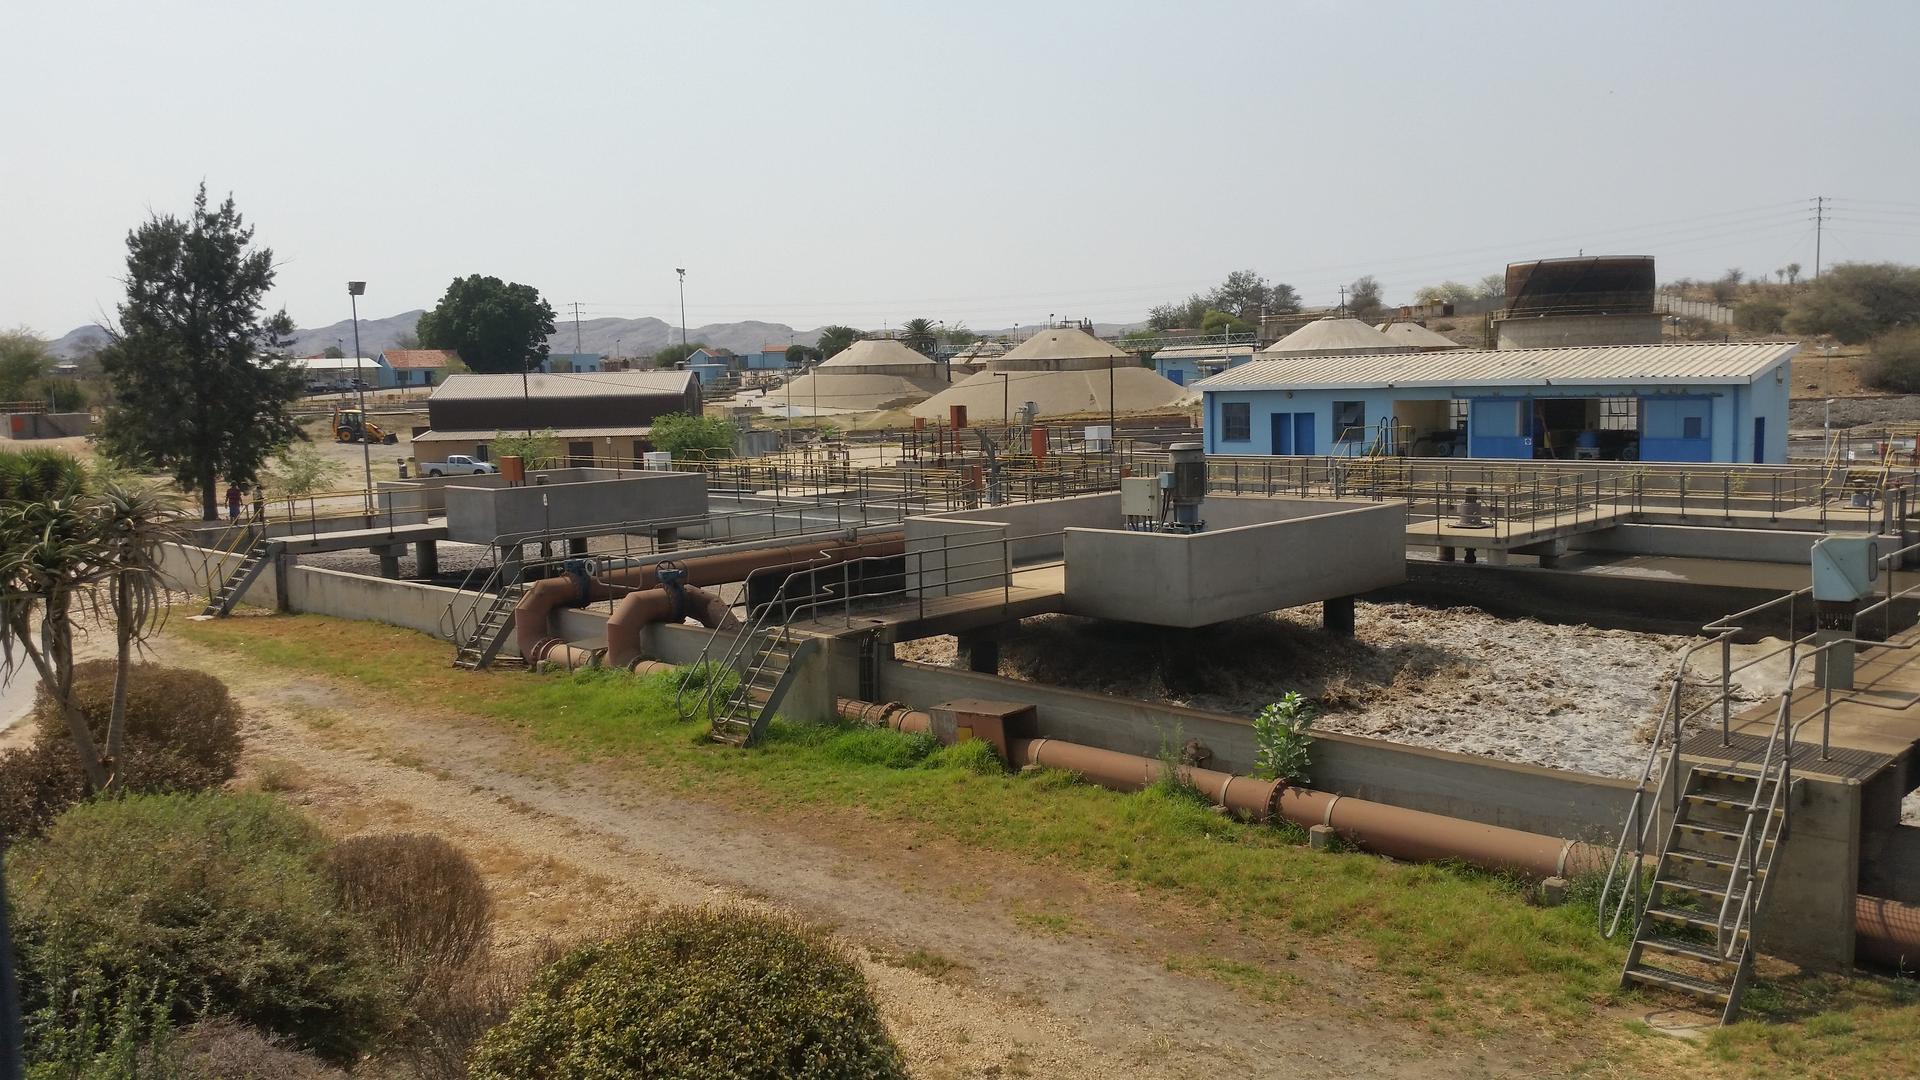 The recyling process begins with a conventional sewage treatment system. But at the point where processed sewage would normally be discharged into a waterway, the Goreangab plant sends it through additional steps that purify it to drinking water standards